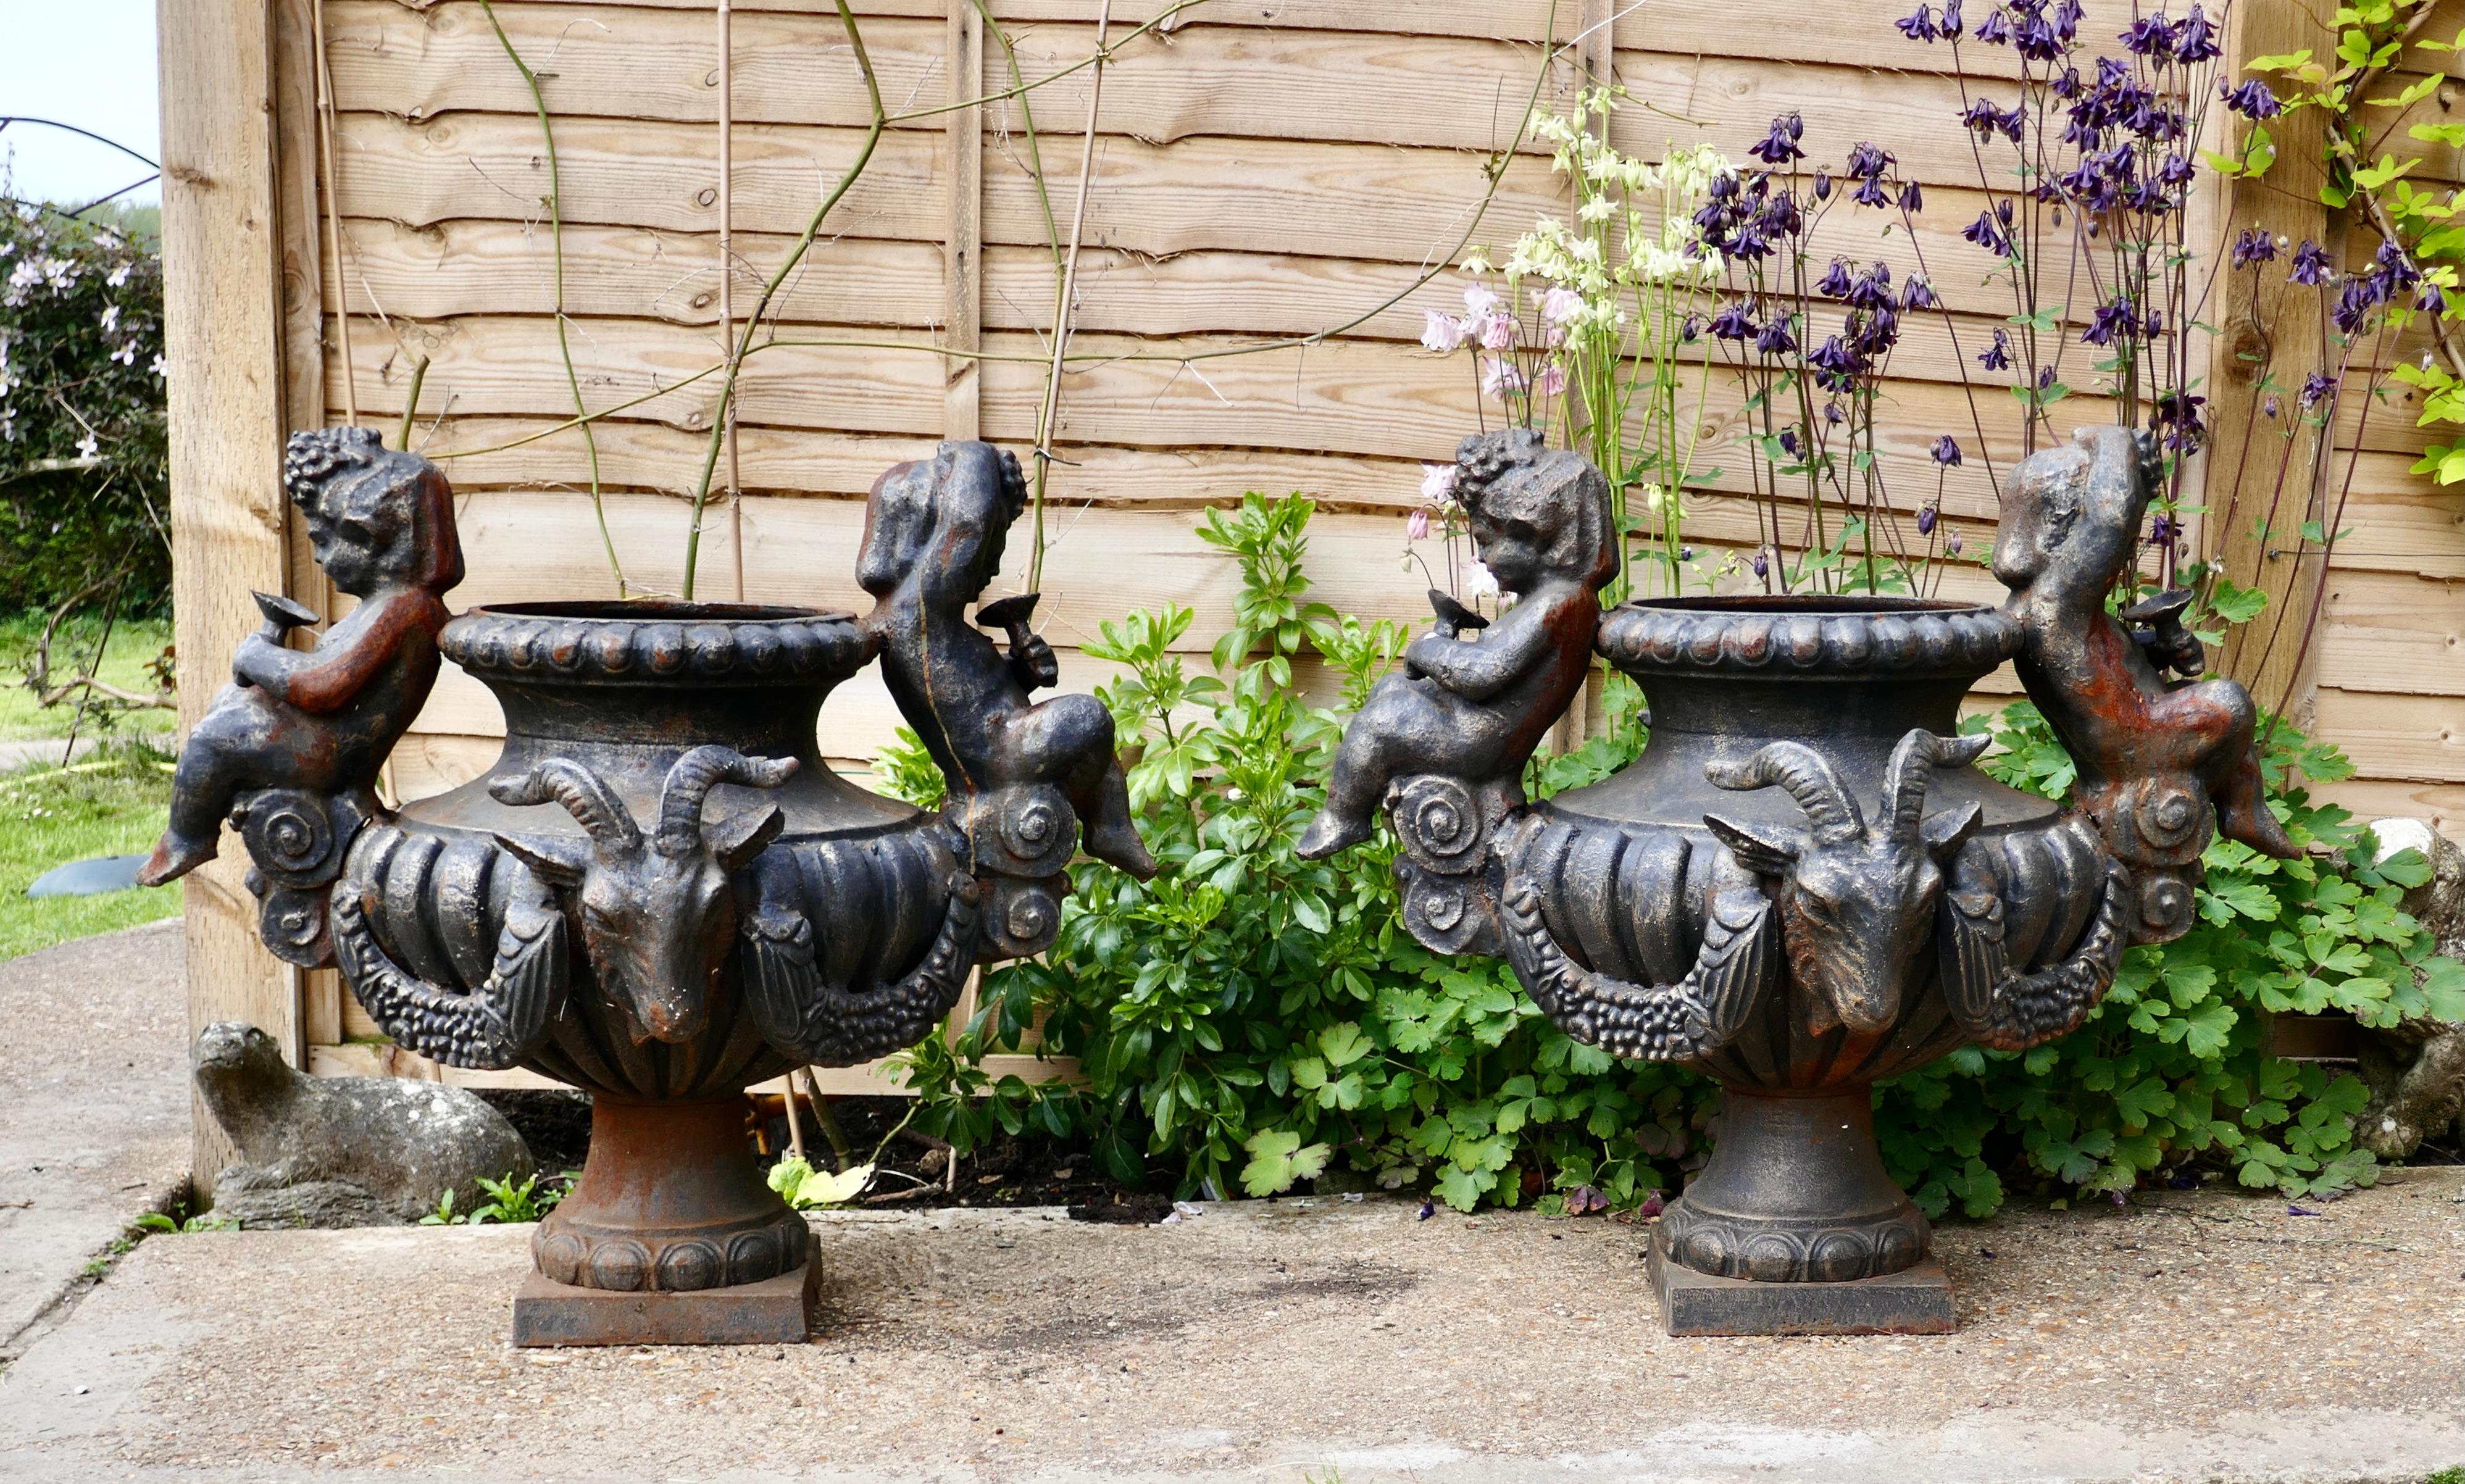 Pair of Large Cast Iron Garden Urns with Rams and Putti

Beautifully Weathered Large Urns, each decorated with 2 cherubs and 2 Rams heads 
The Urns are slightly rusty but otherwise they are in good Condition and obviously Heavy

The Urns are 27”